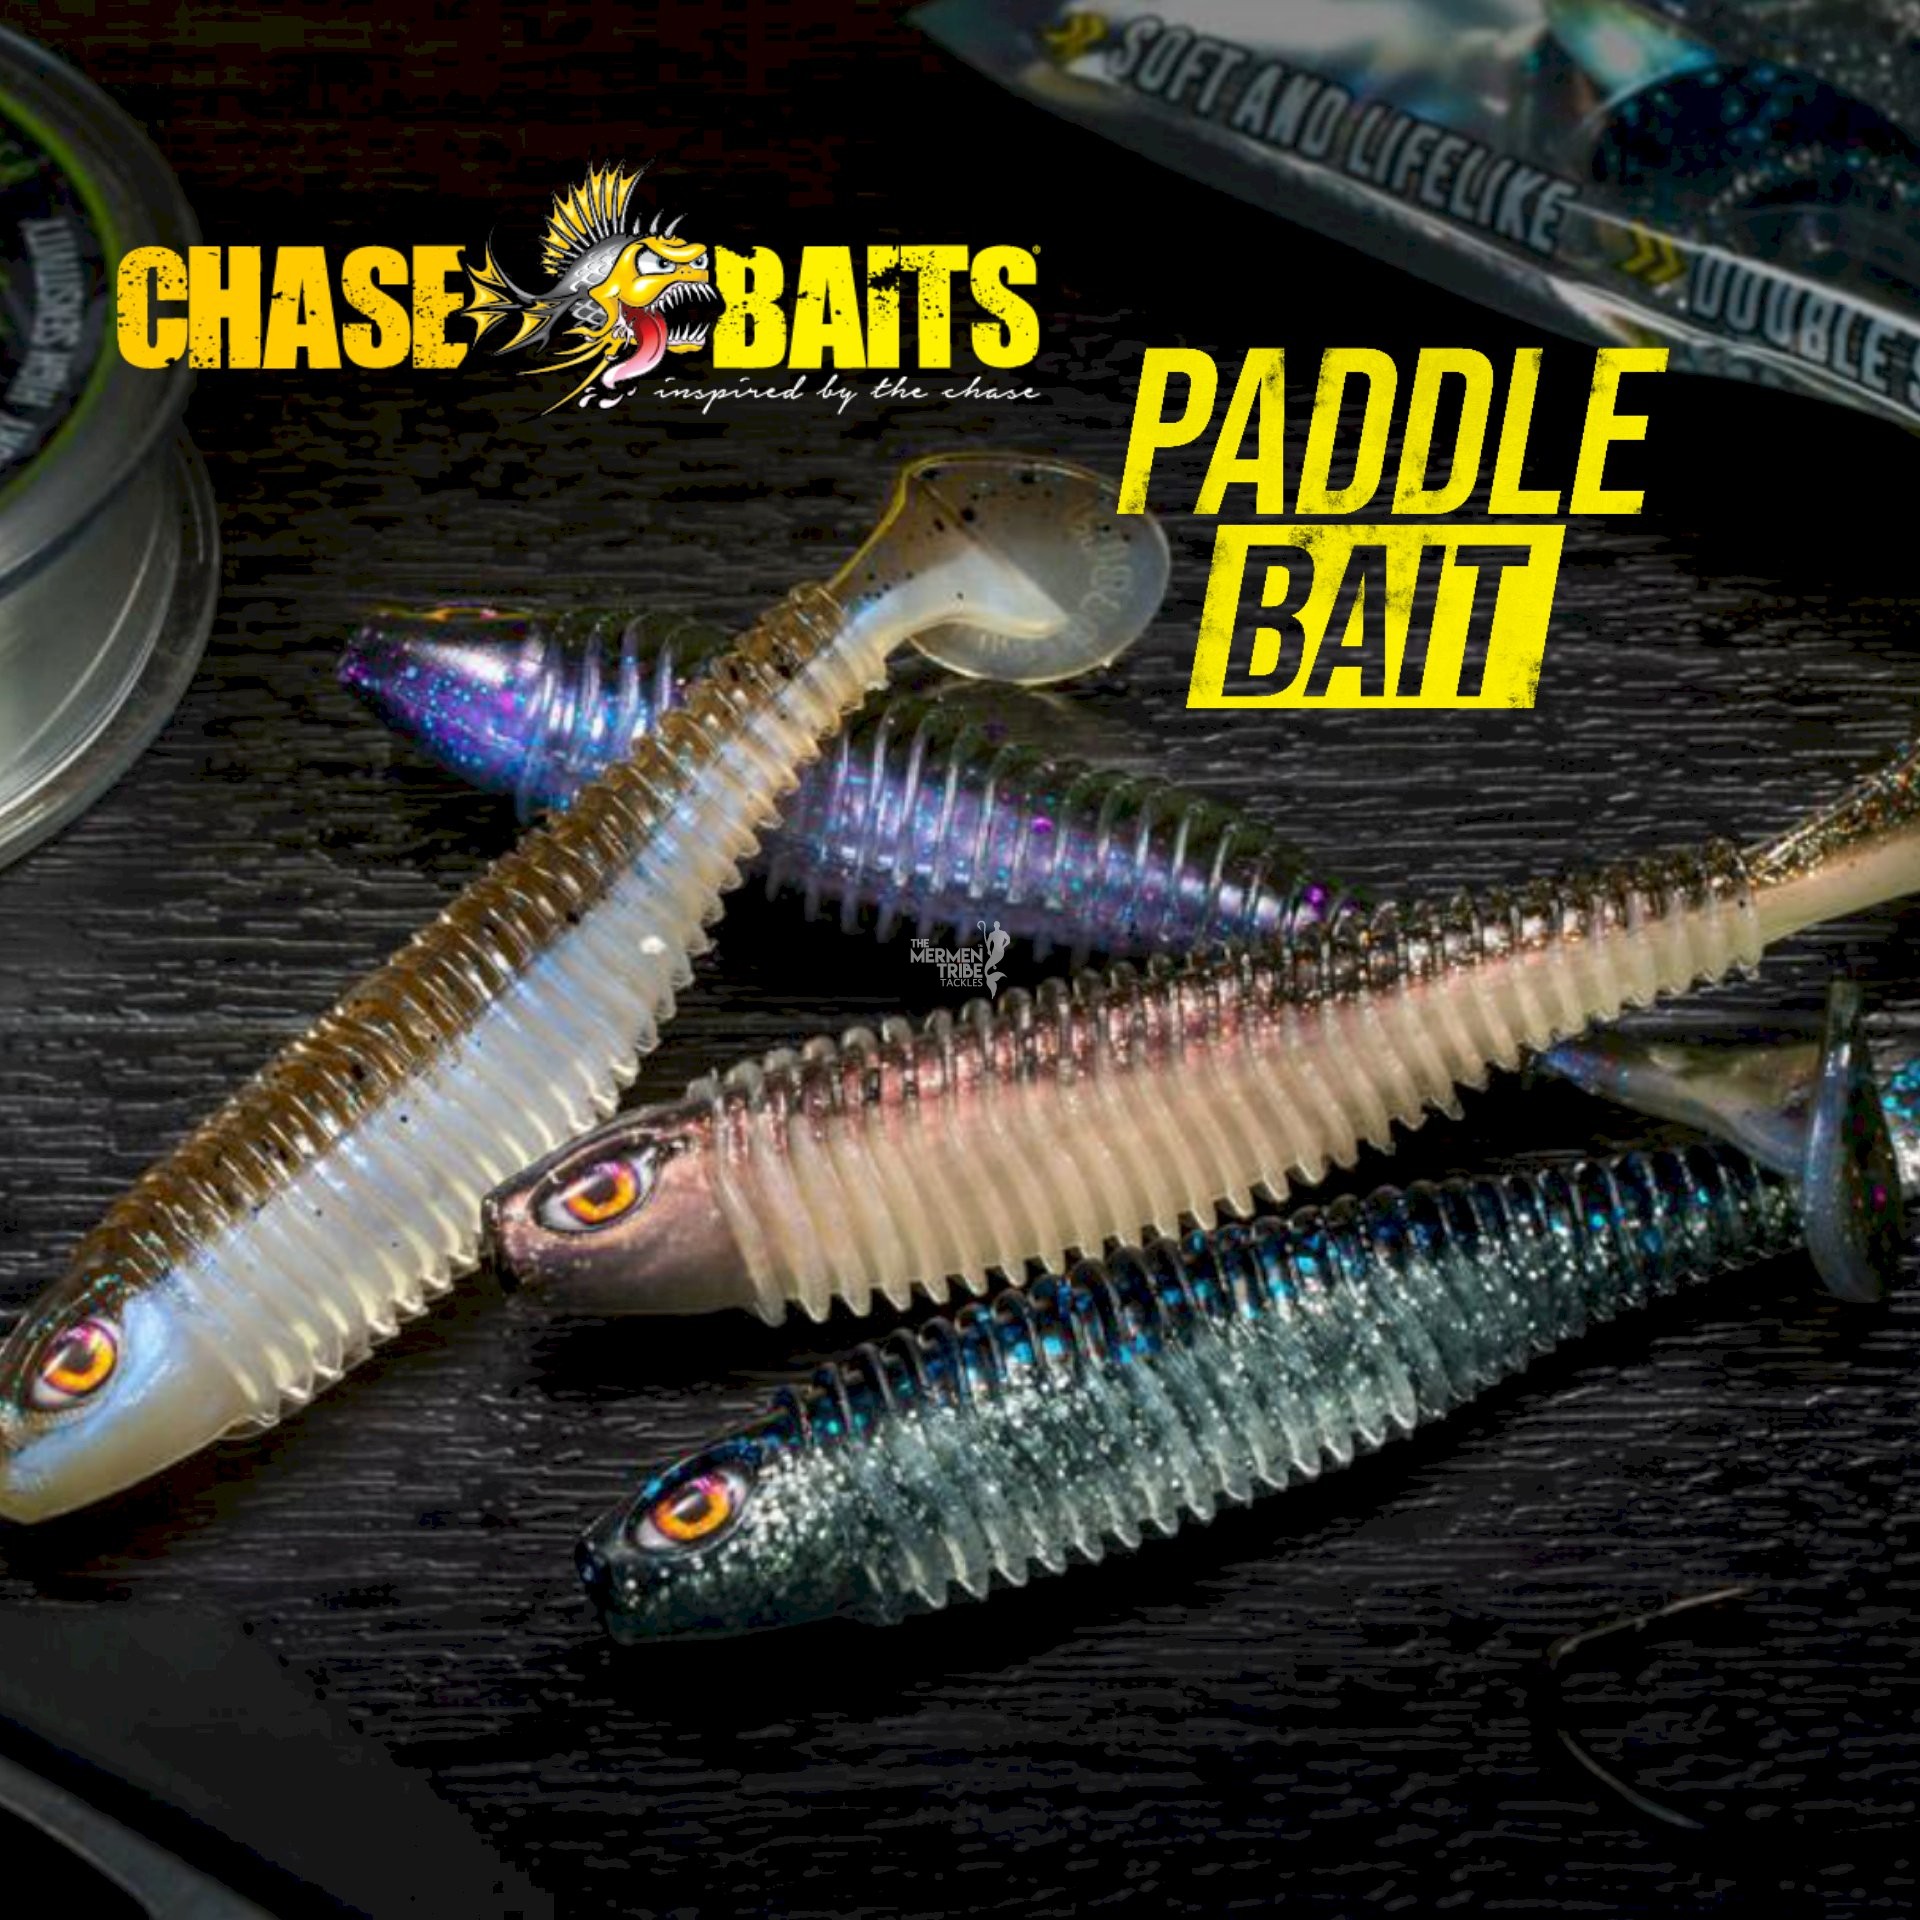 Chasebaits Paddle Bait 4 inches - Mermentribe- Online Tackles Store